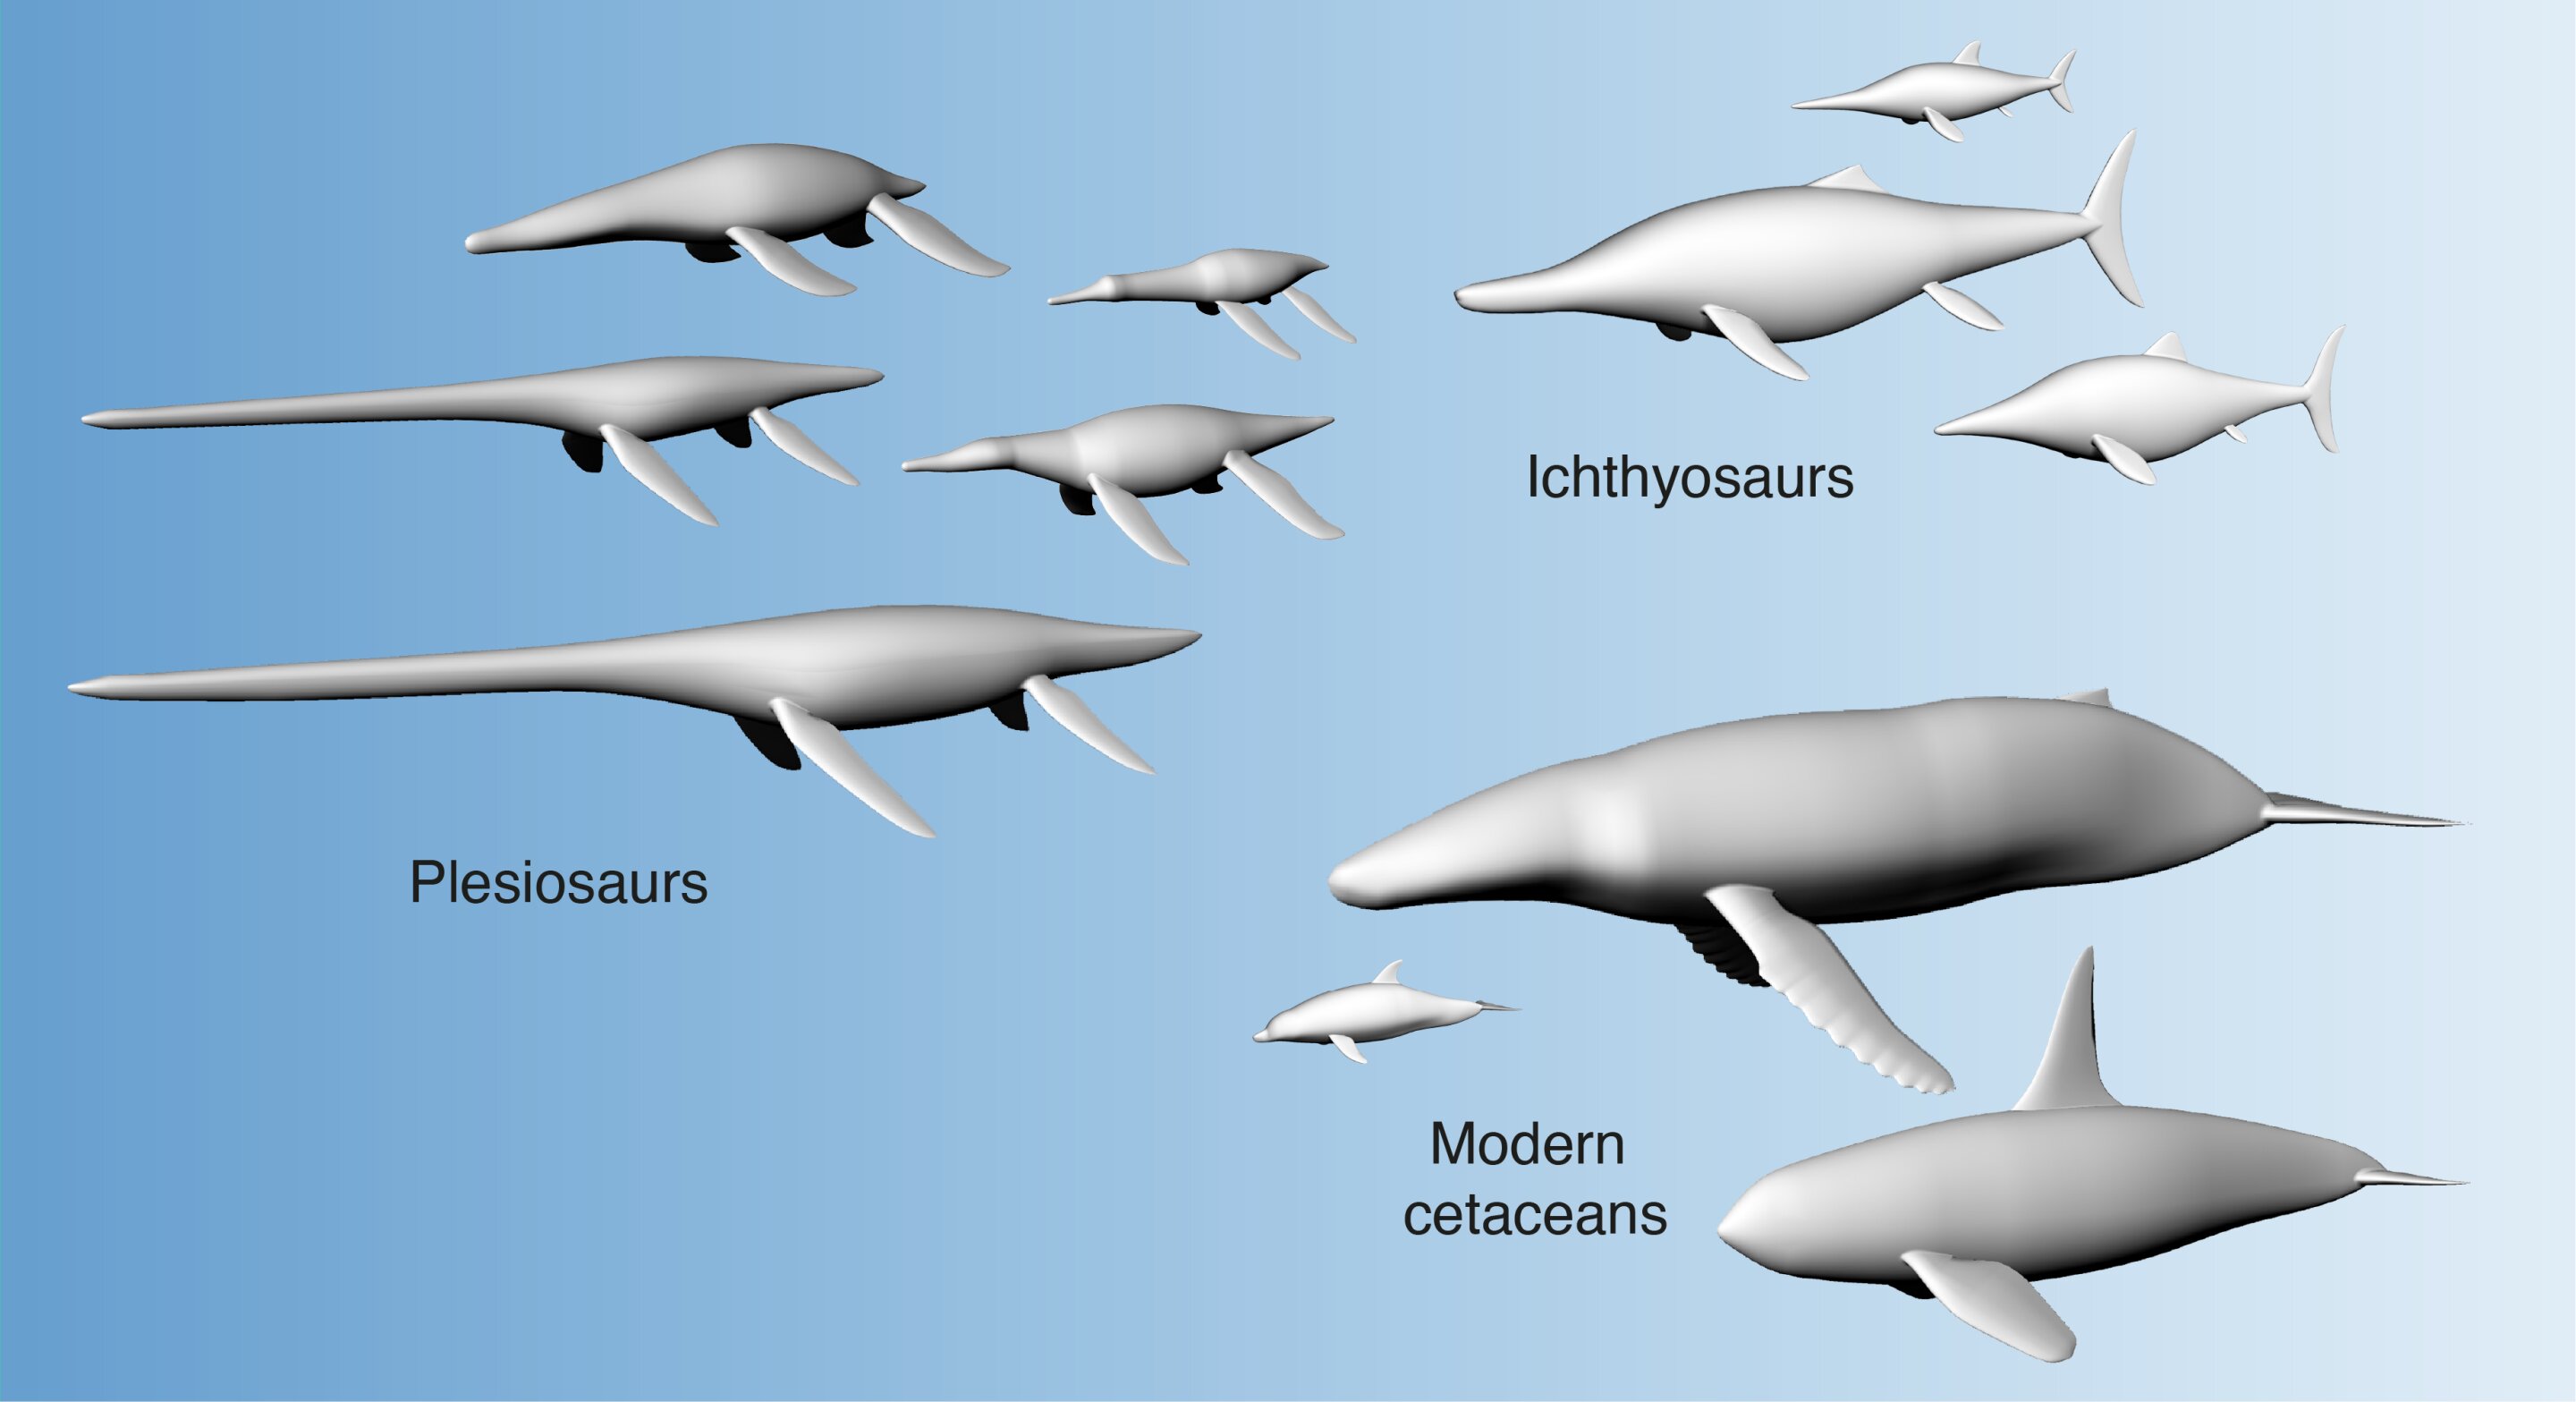 Large bodies helped extinct marine reptiles with long necks swim, new study find..